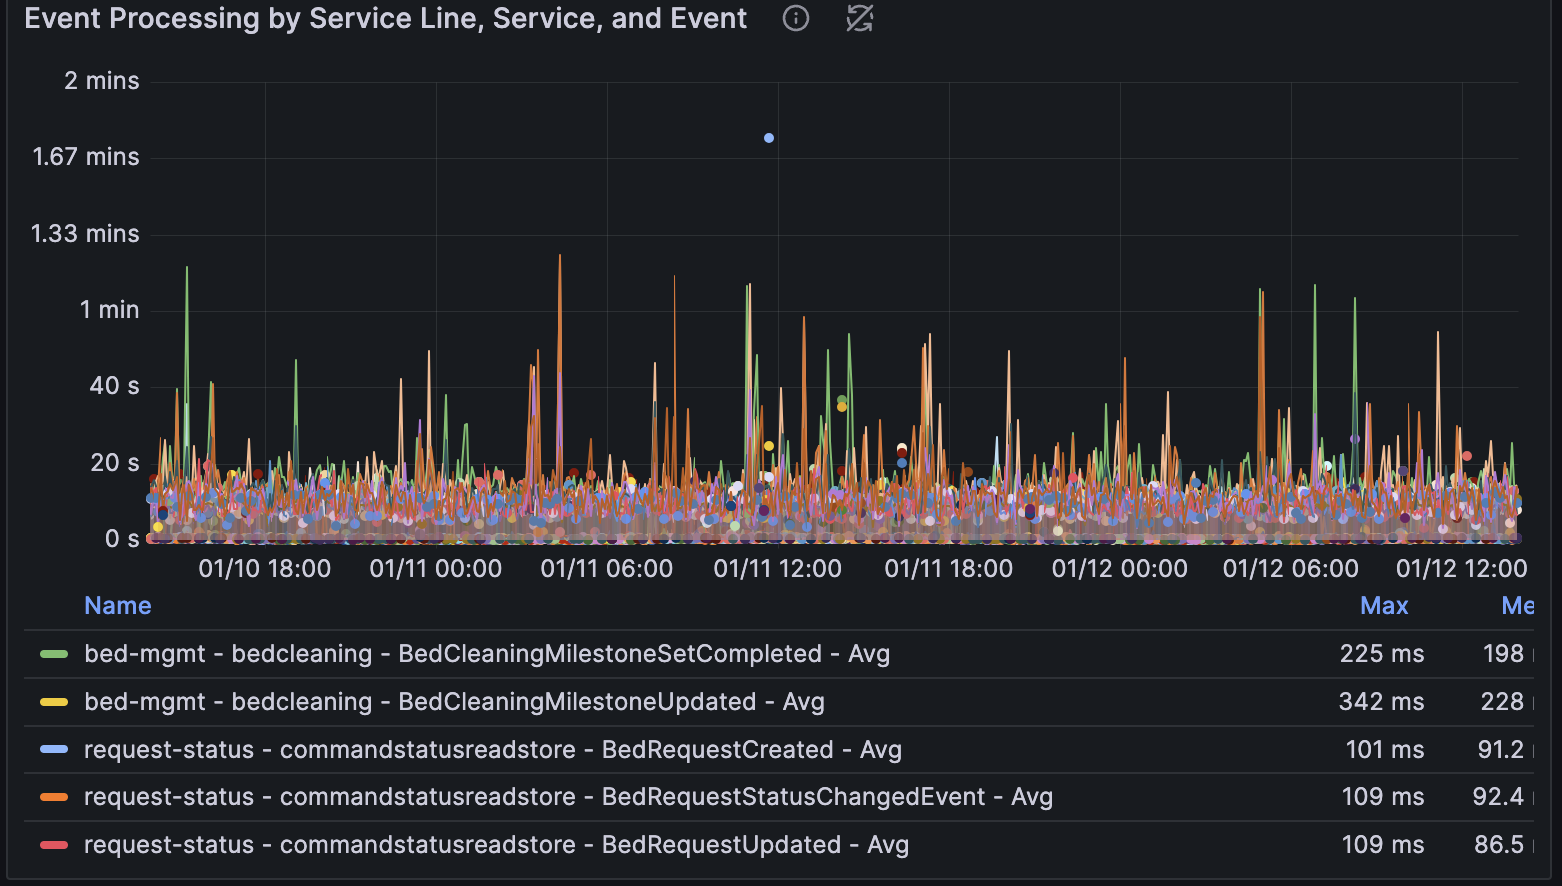 A dashboard showing event processing by service line, service, and event.